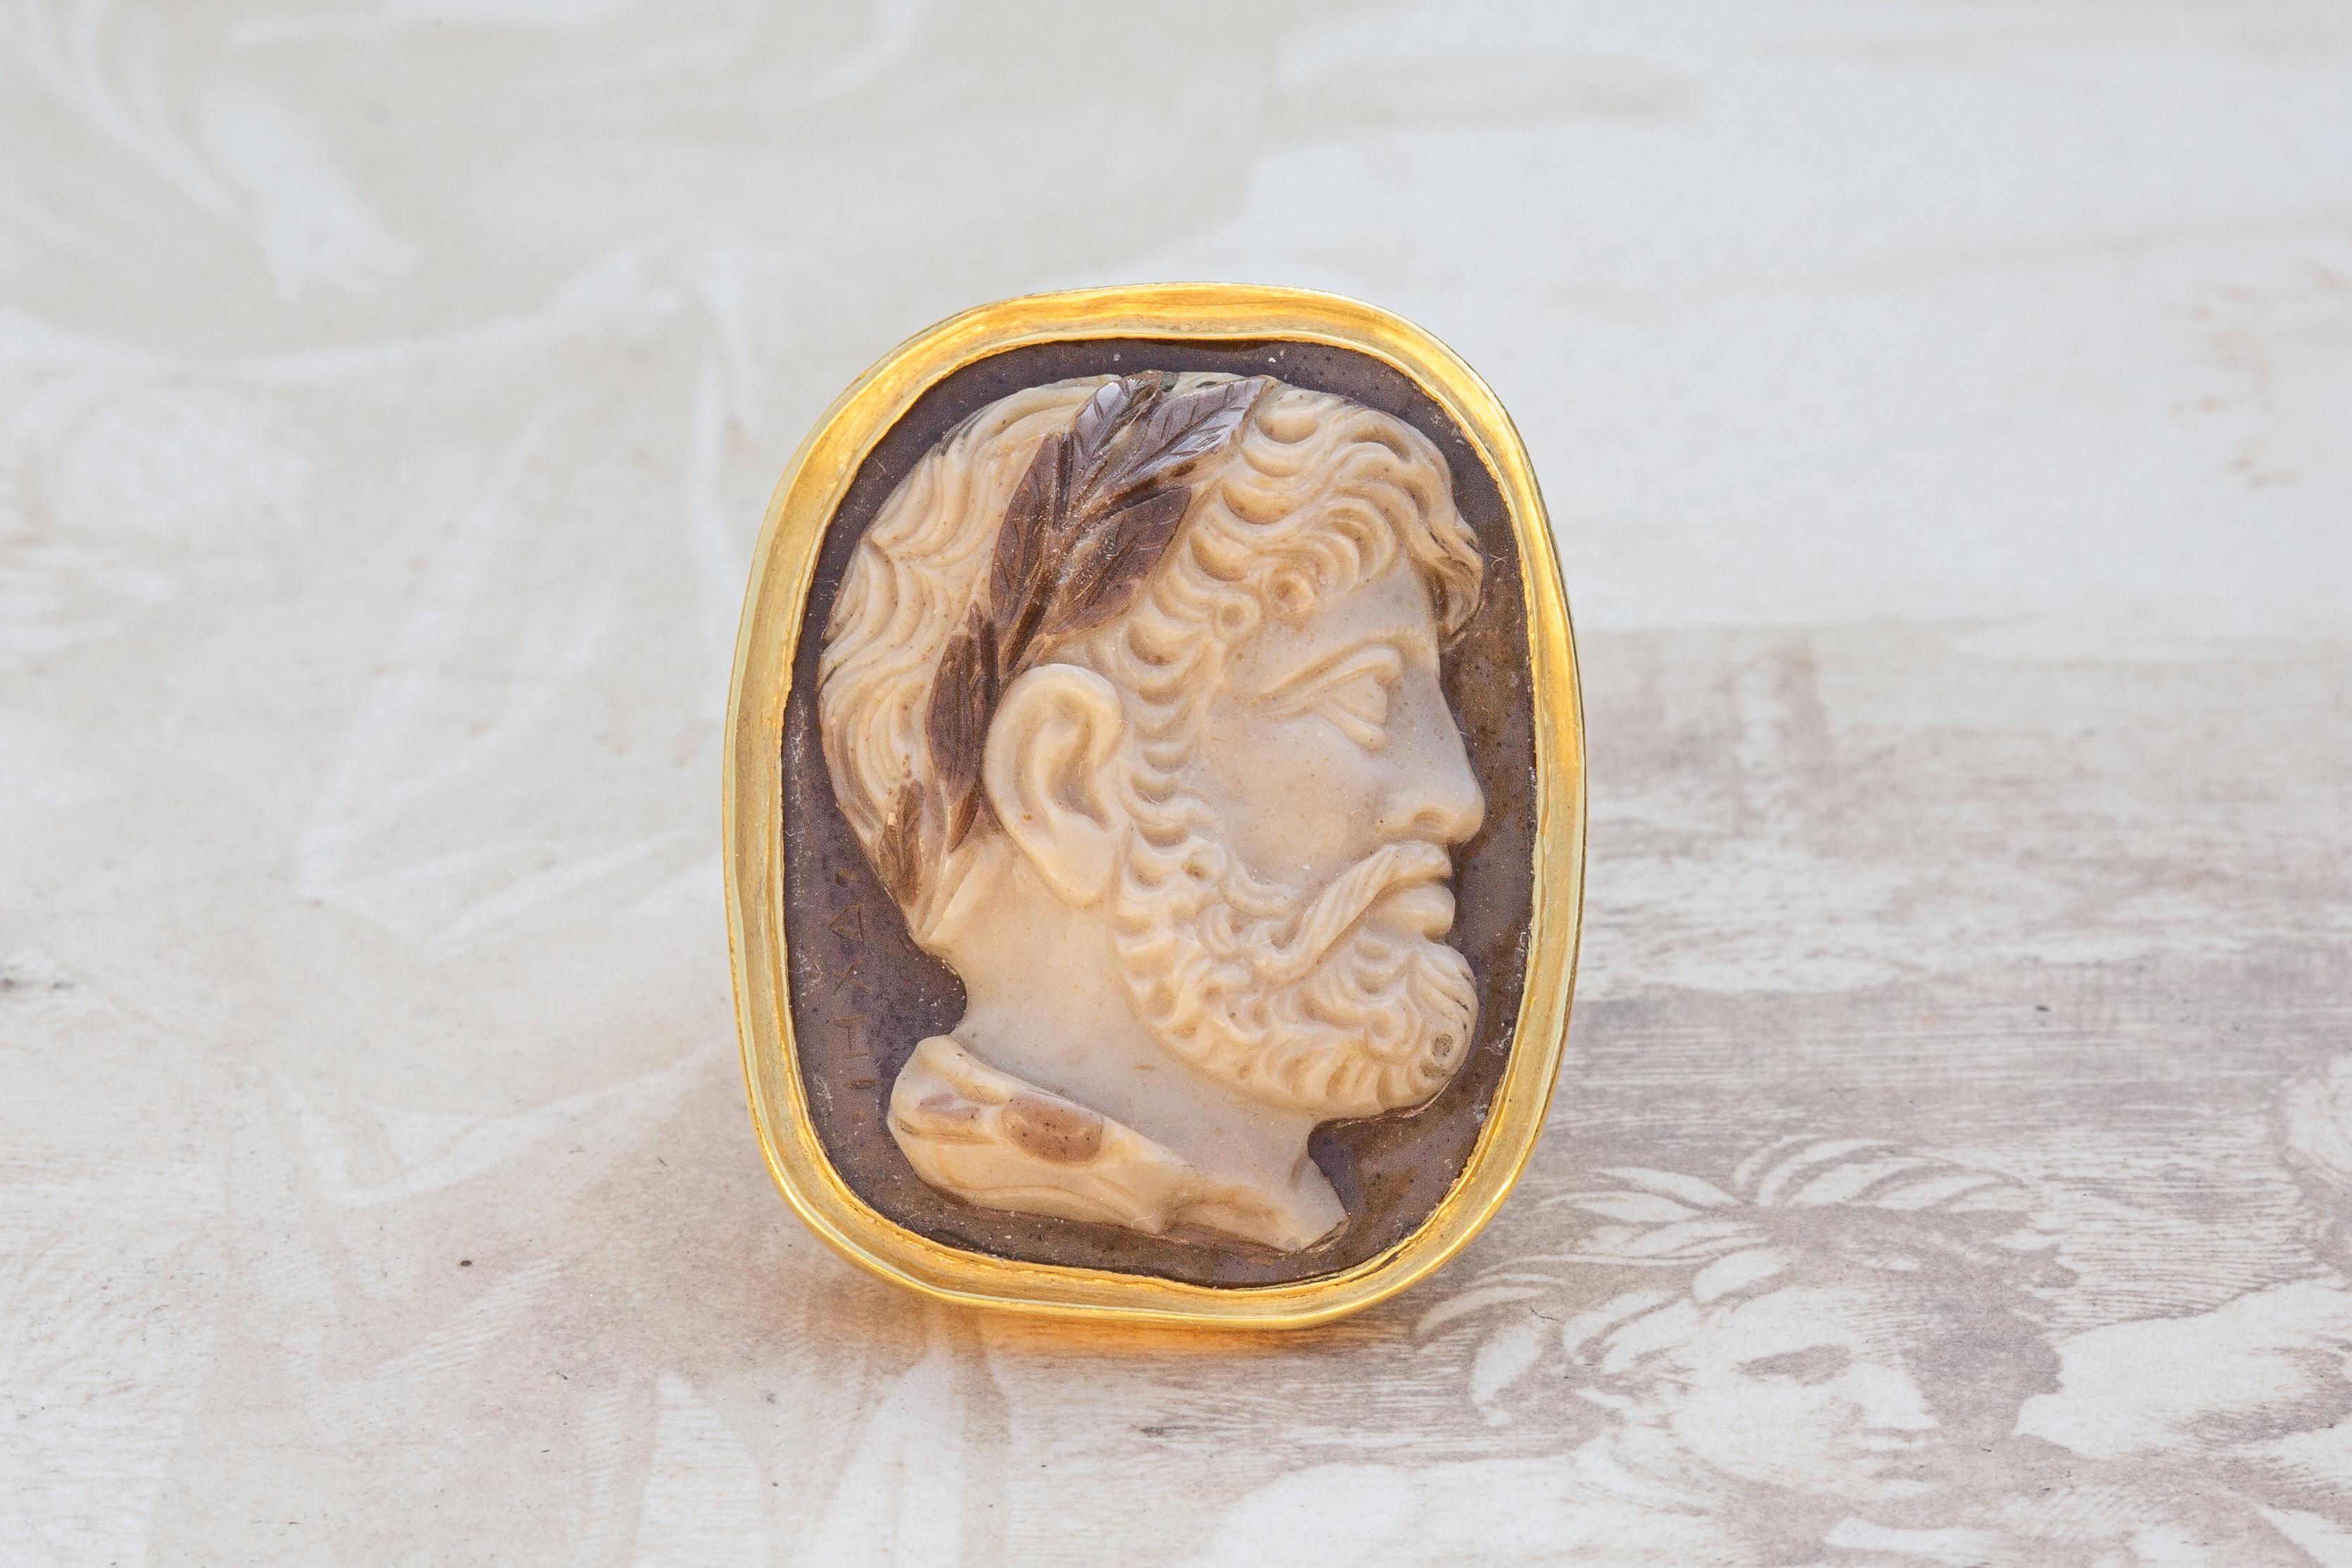 A rare 17th century Italian hardstone cameo set in a later high karat gold signet mount. This beautiful creamy-brown layered cameo is carved from a single piece of jasper to reveal the portrait of the emperor Hadrian in classical style. The effigy